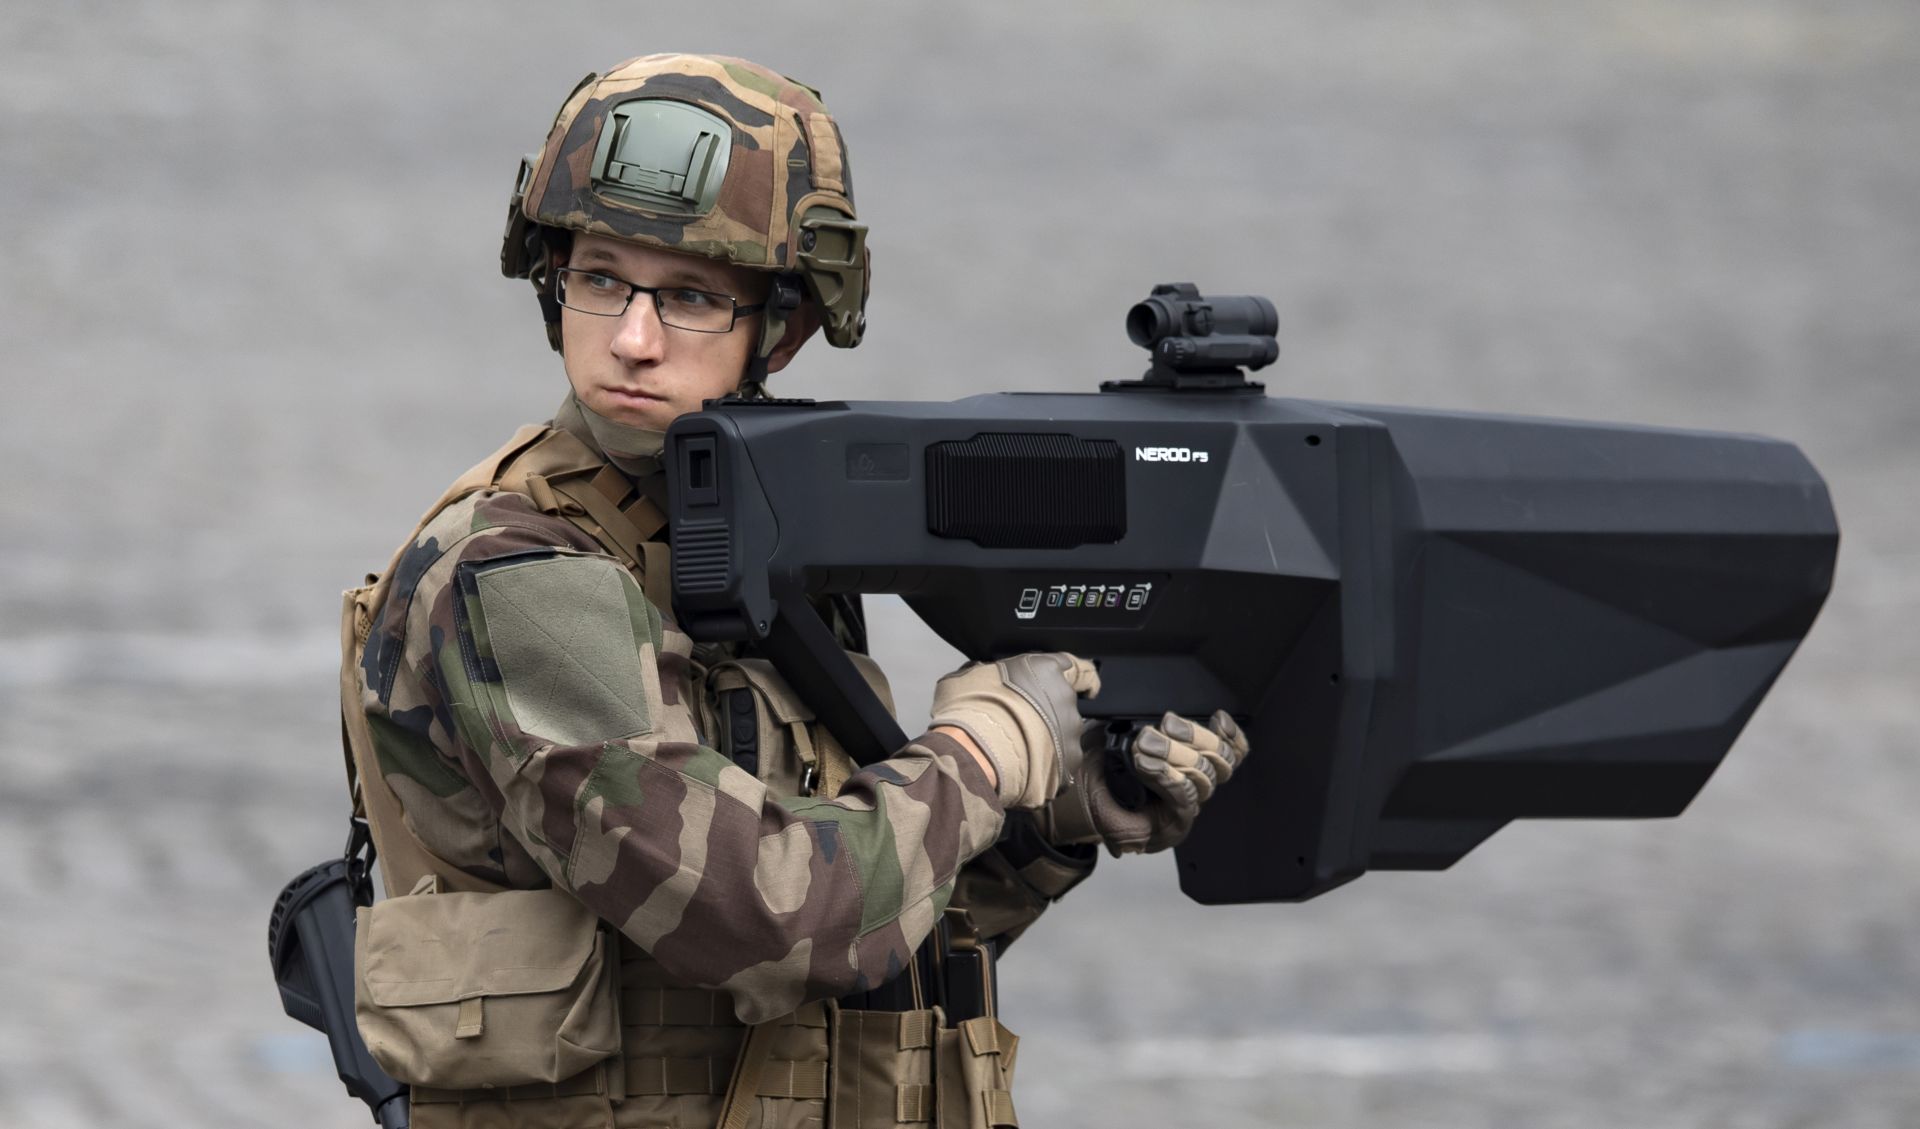 epa07716156 French soldier demonstrates NEROD F5 anti-drone rifle during the annual Bastille Day military parade on the Champs Elysees avenue in Paris, France, 14 July 2019. Bastille Day, the French National Day, is held annually on 14 July to commemorate the storming of the Bastille fortress in 1789.  EPA/IAN LANGSDON